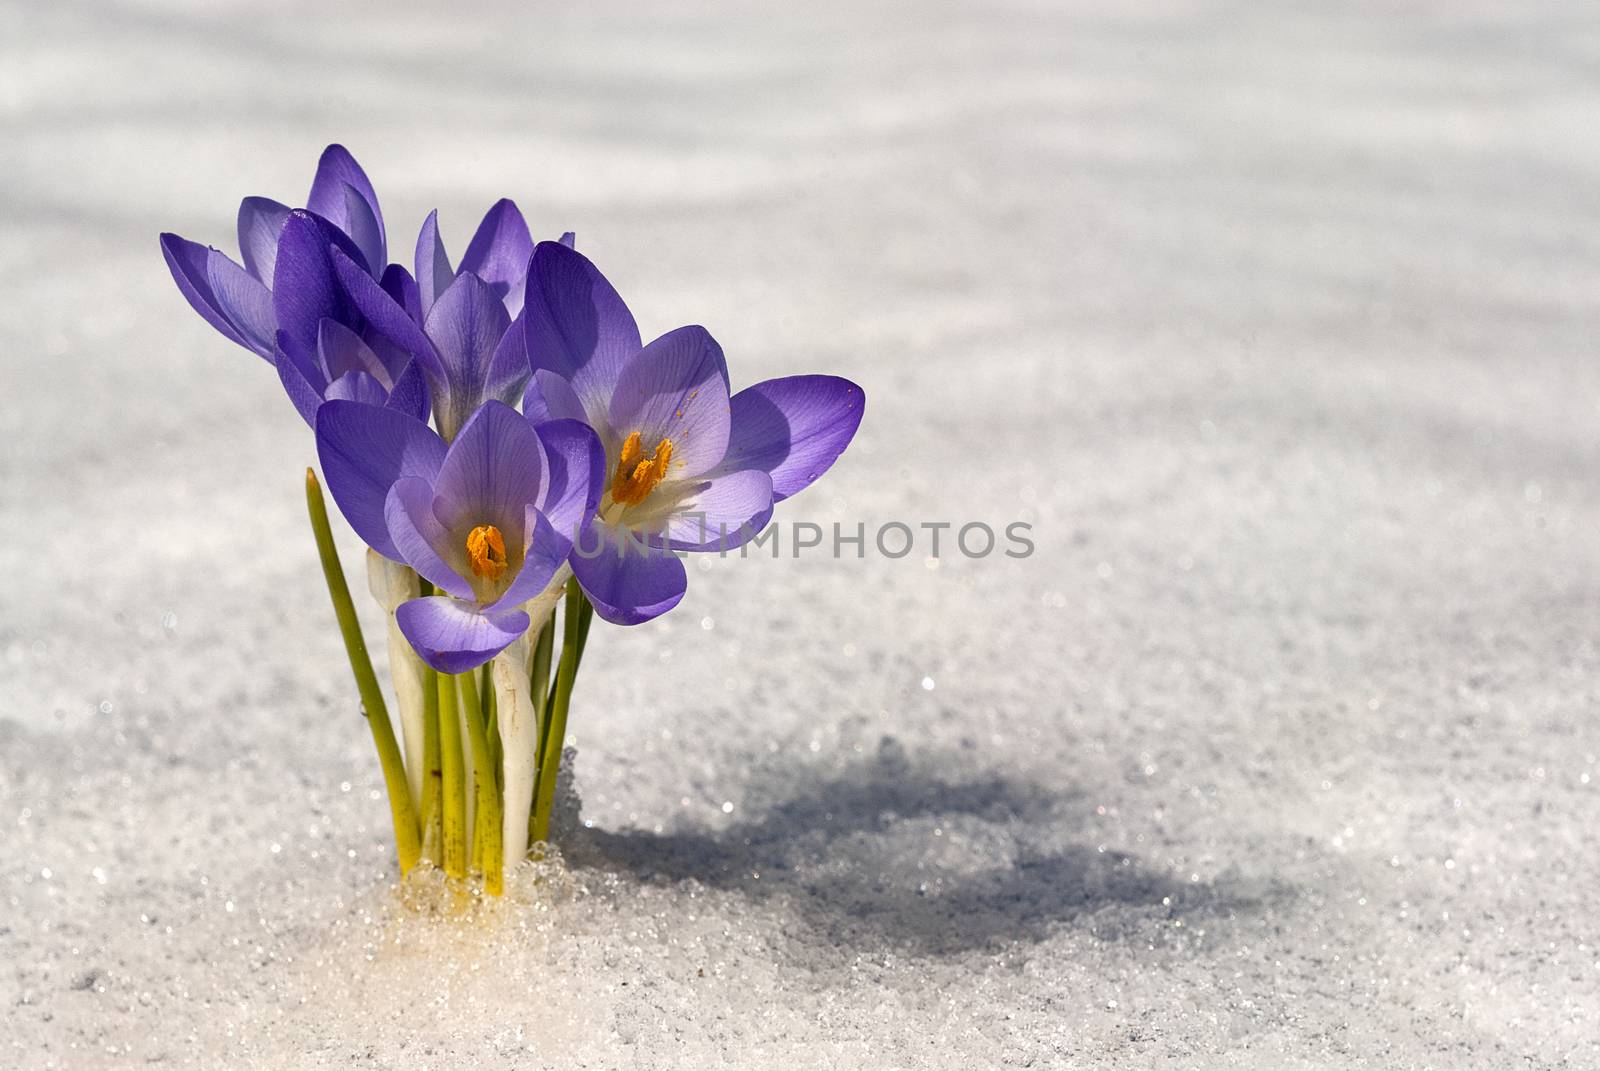 Colchicum autumnale, Mountain Merendera. remove shops, Flower in the snow